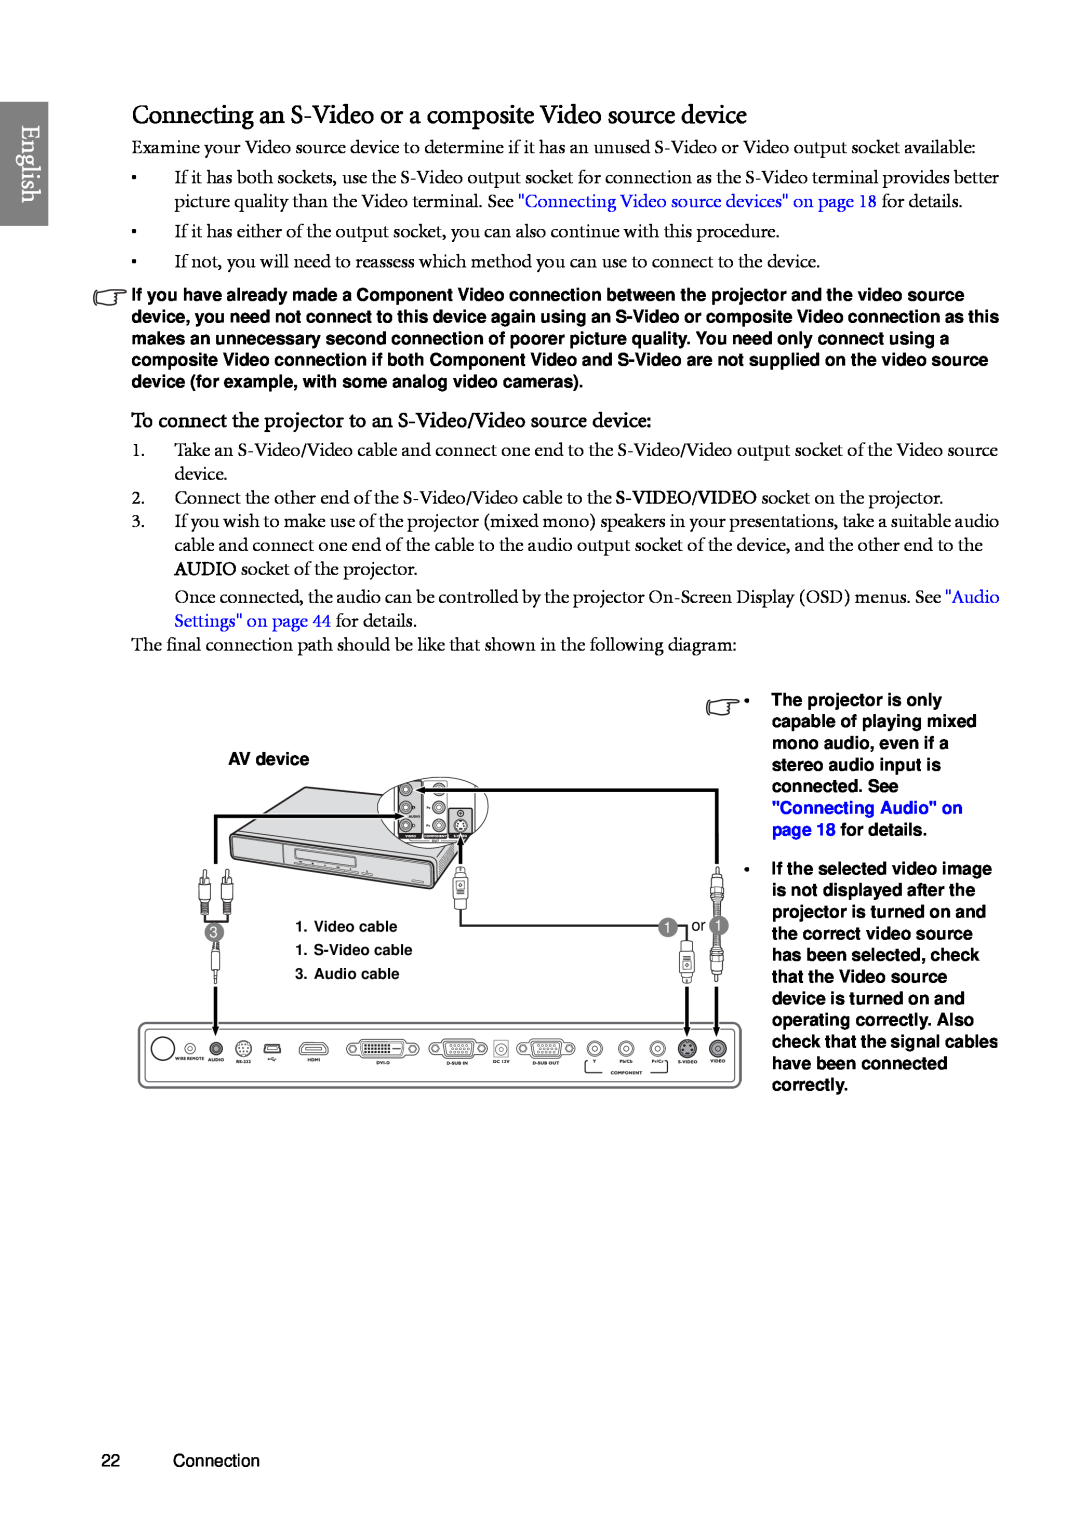 BenQ SP920 user manual Connecting an S-Video or a composite Video source device, English 